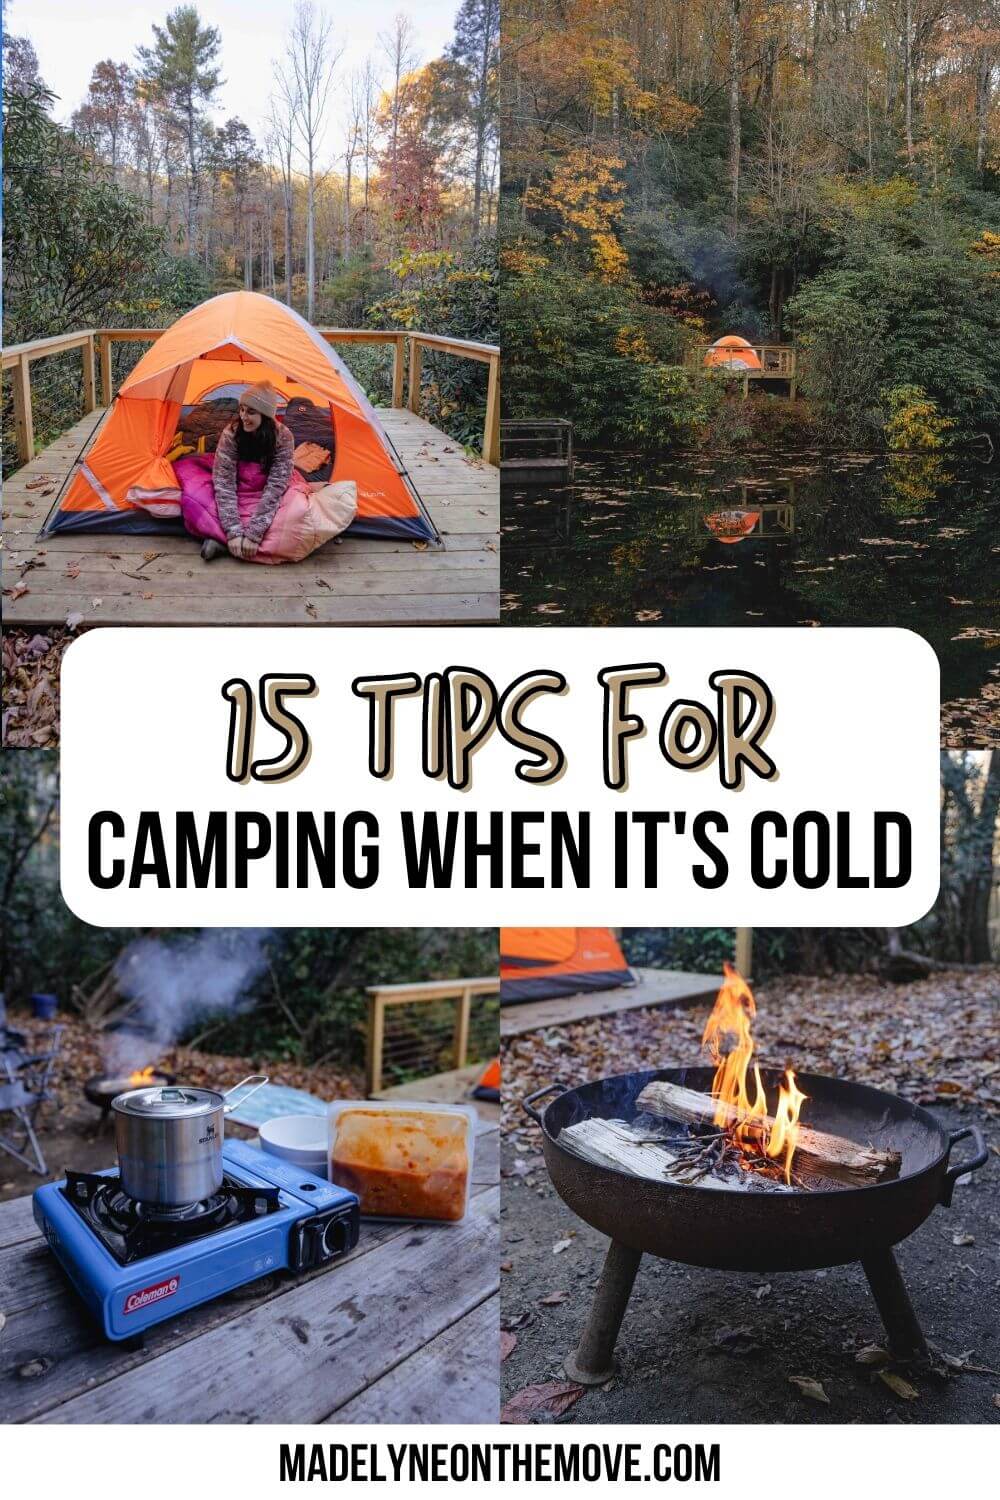 Tips for camping when it's cold